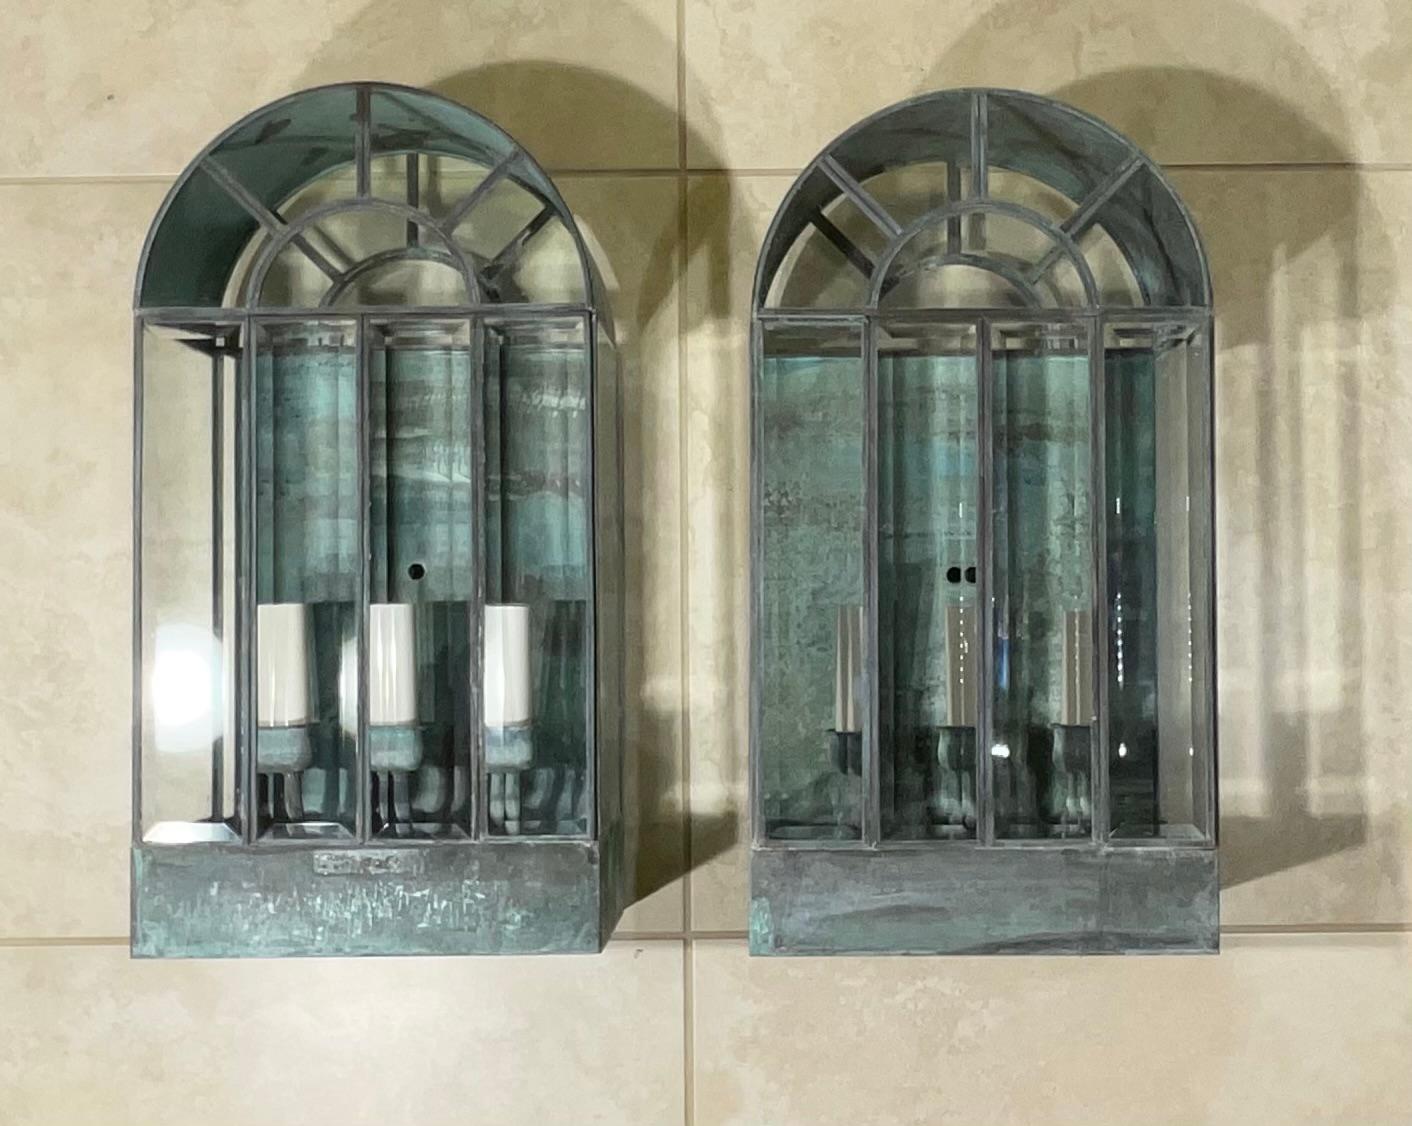 Pair of wall hanging lantern arch style made of solid brass, quality workmanship, bevelled glass, electrified with three 40/watt lights each lantern, beautiful patina great light exposure. Working and ready to use.
Suitable for wet locations.